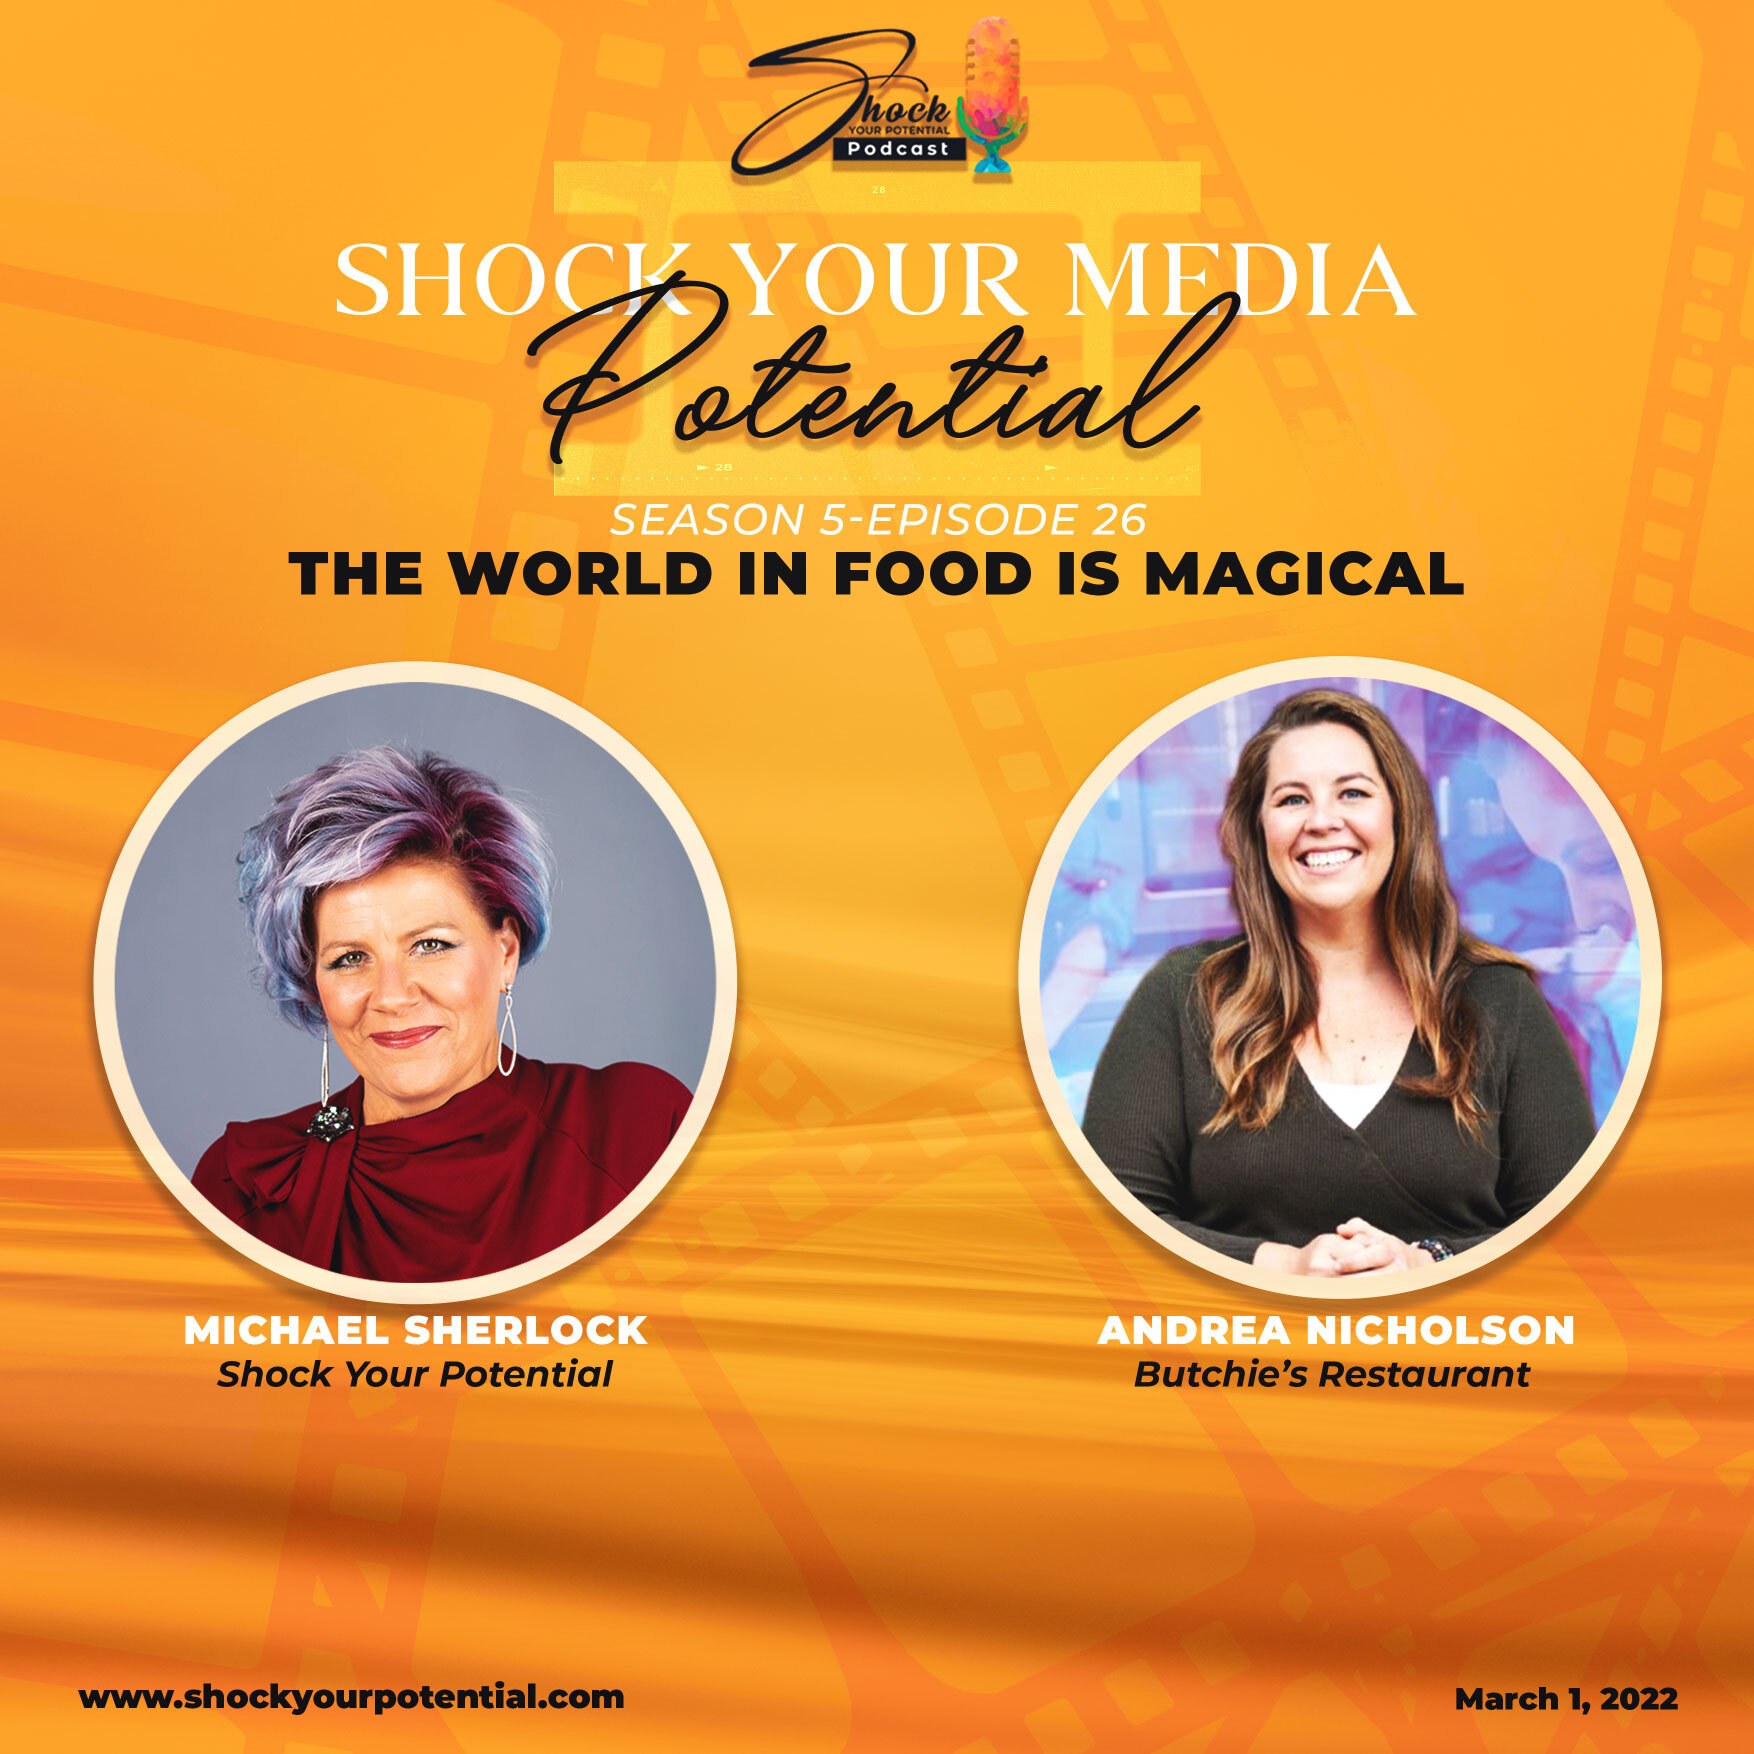 The World in Food is Magical – Andrea Nicholson